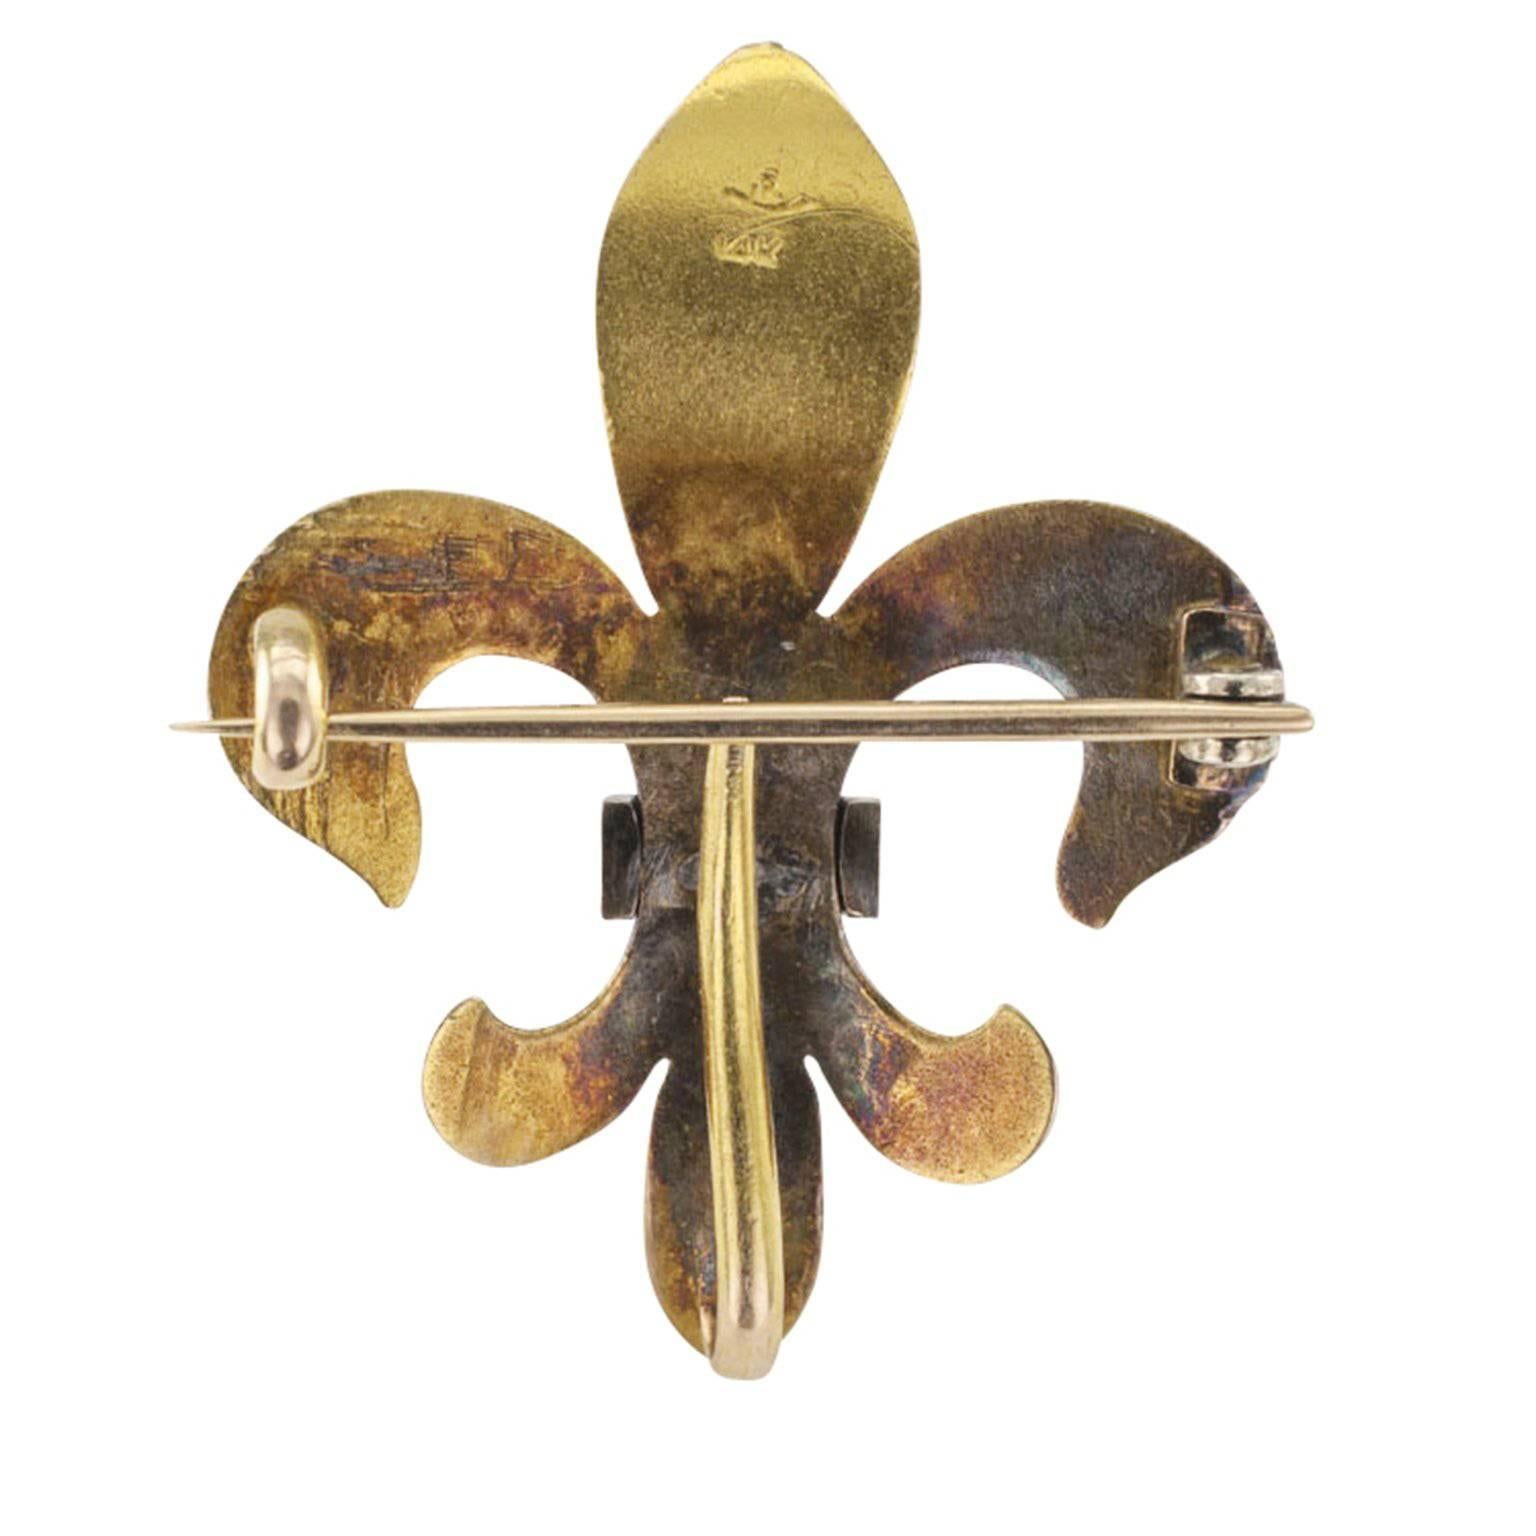 Rikers Victorian Fleur de Lis Brooch

Victorian fleur de lis brooch, circa 1895, mounted in 14-karat gold with pearls, maker's marks for Rikers. The sculptural design features a watch hook on the back and a wonderful patina that emphasizes the